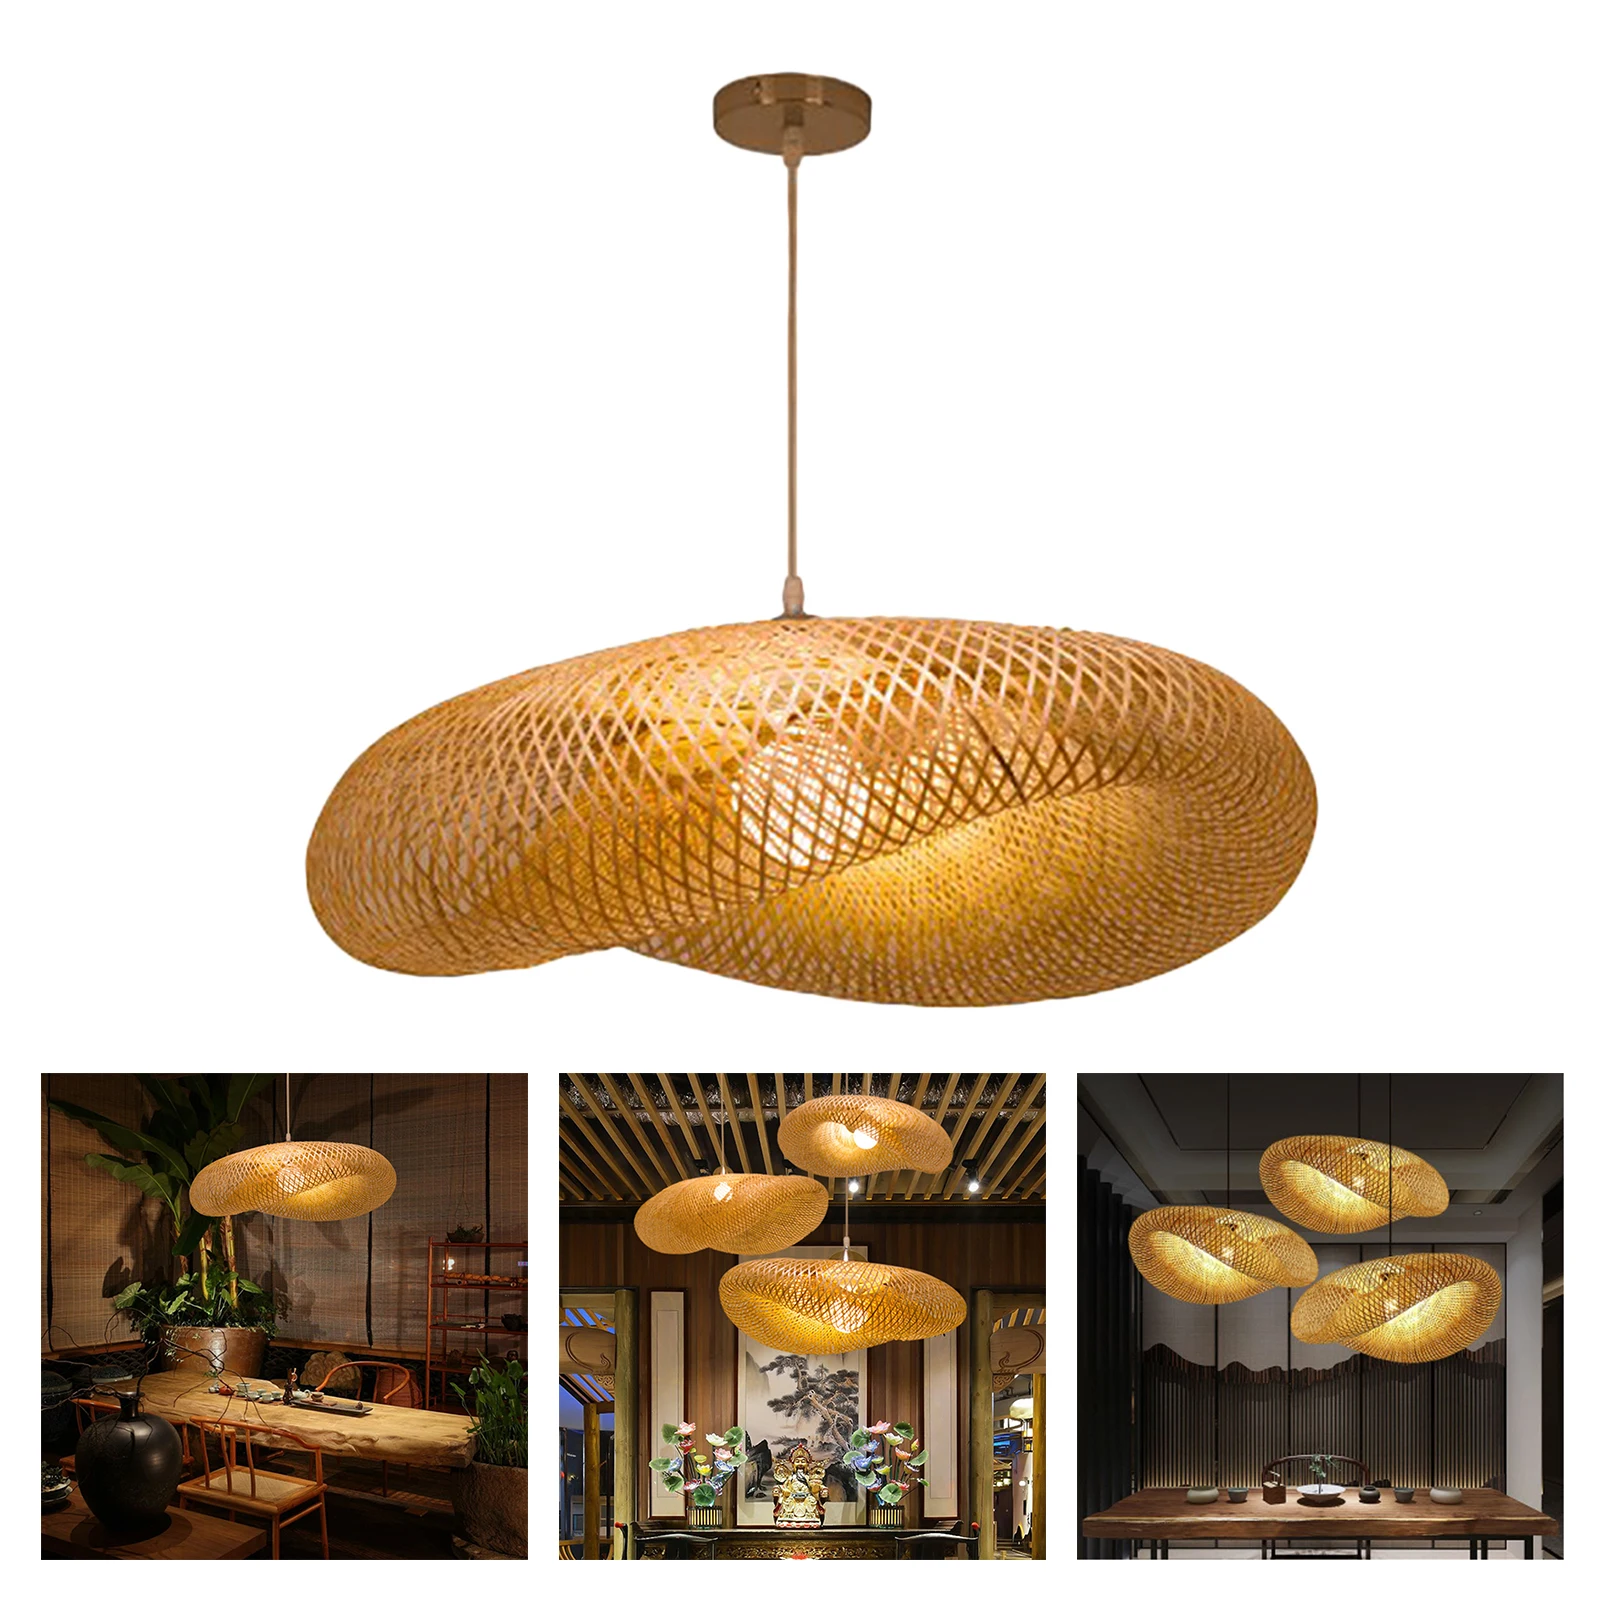 Hf199e780bb4a404fbe9eec5aa8eda63bF Retro Bamboo Weaving Chandelier Lamp Hanging LED Ceiling Lamp Droplight Fixtures for Restaurant Living Room Bedroom Decoration